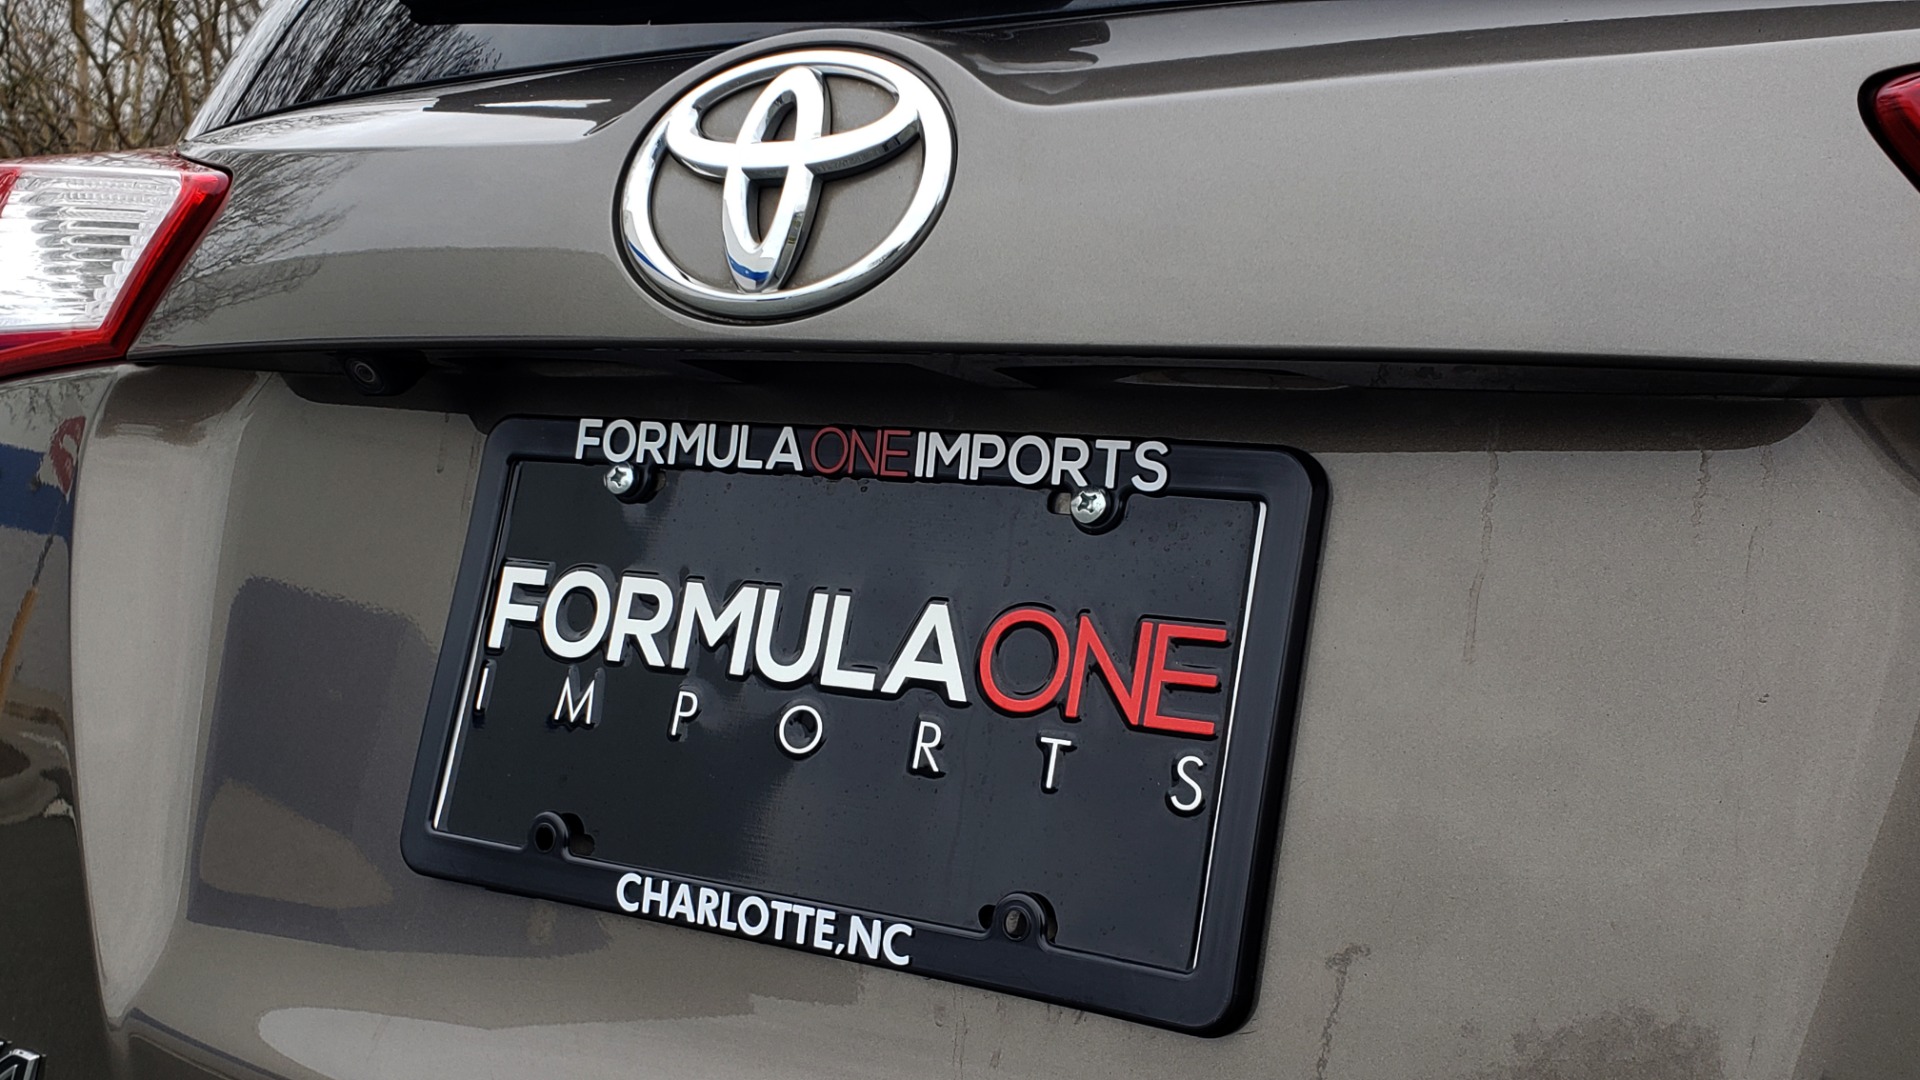 Used 2013 Toyota RAV4 LE / AUTO / FWD / 29 MPG HWY / CLEAN CARFAX for sale Sold at Formula Imports in Charlotte NC 28227 29